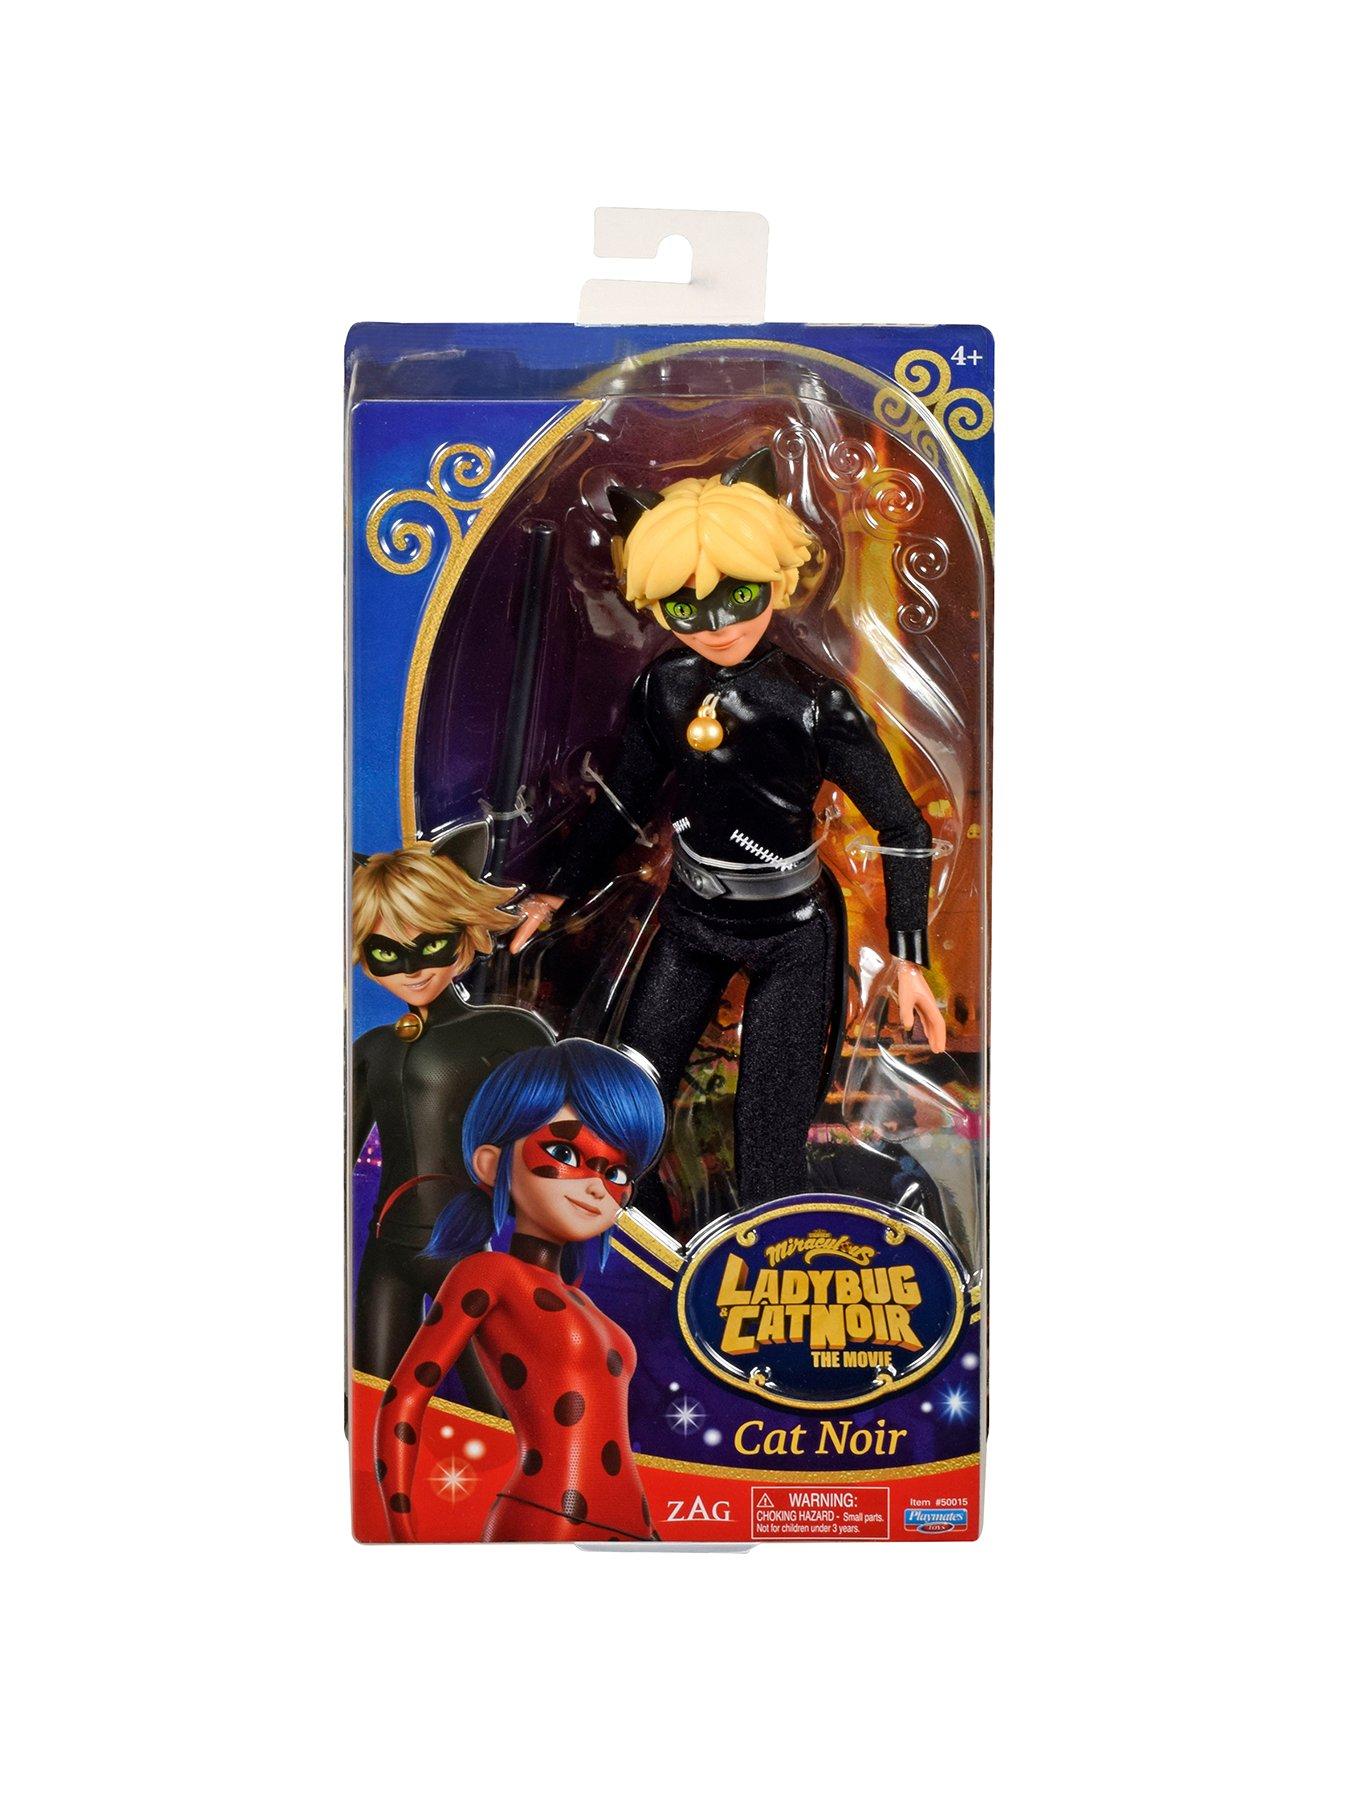 This Miraculous Ladybug figurine comes with 1 accessory. Ages 4+